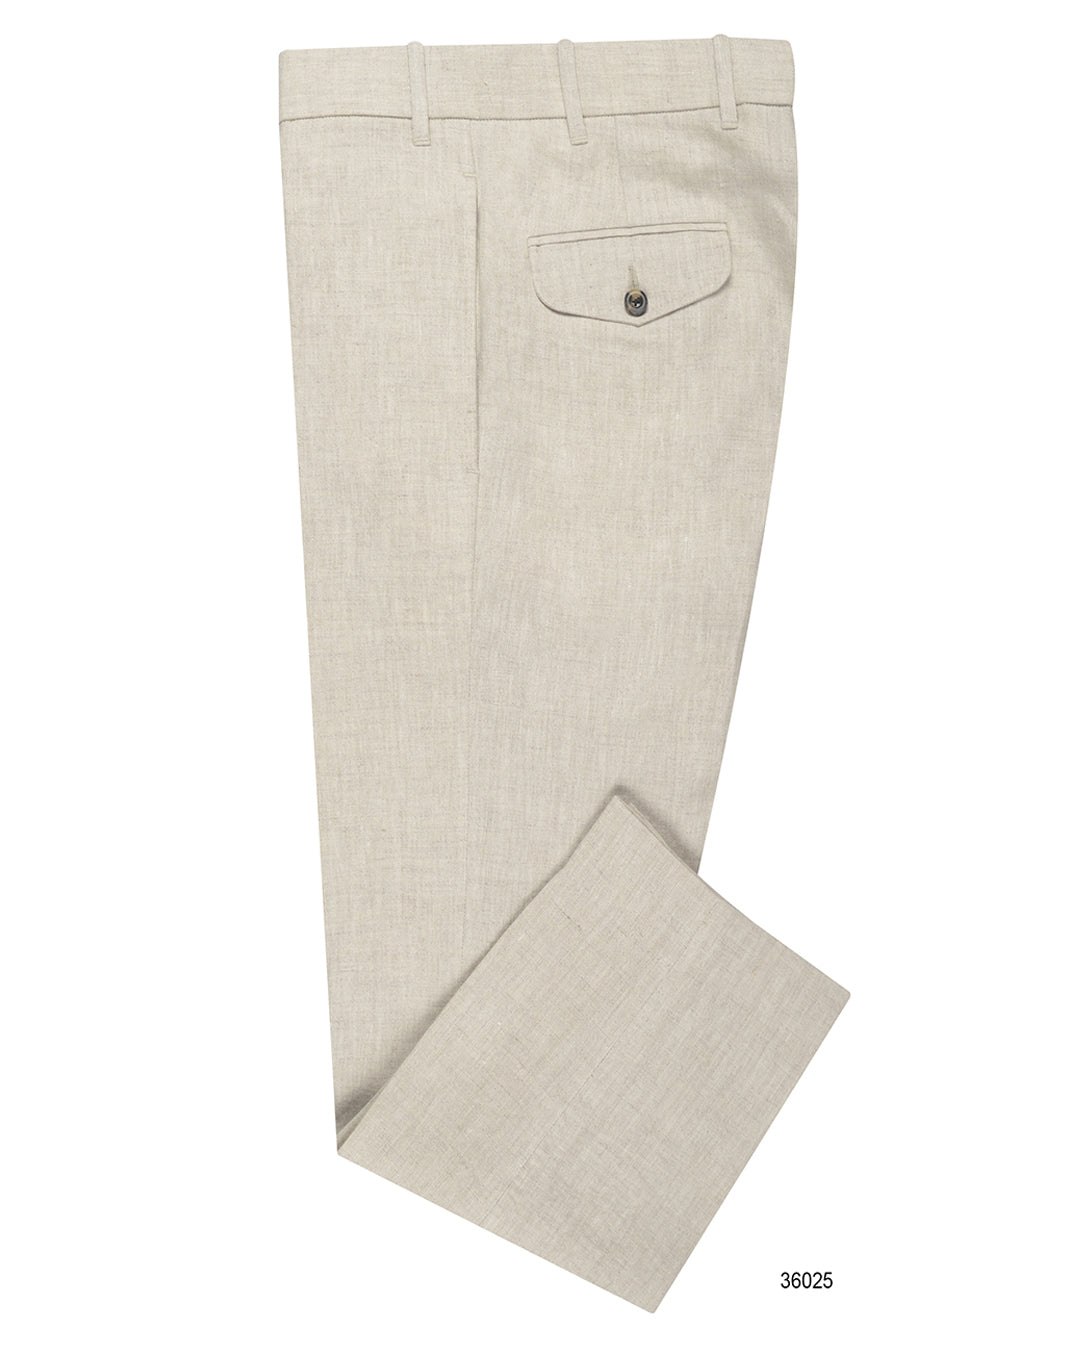 Side view of custom linen suiting pants for men by Luxire in muslin